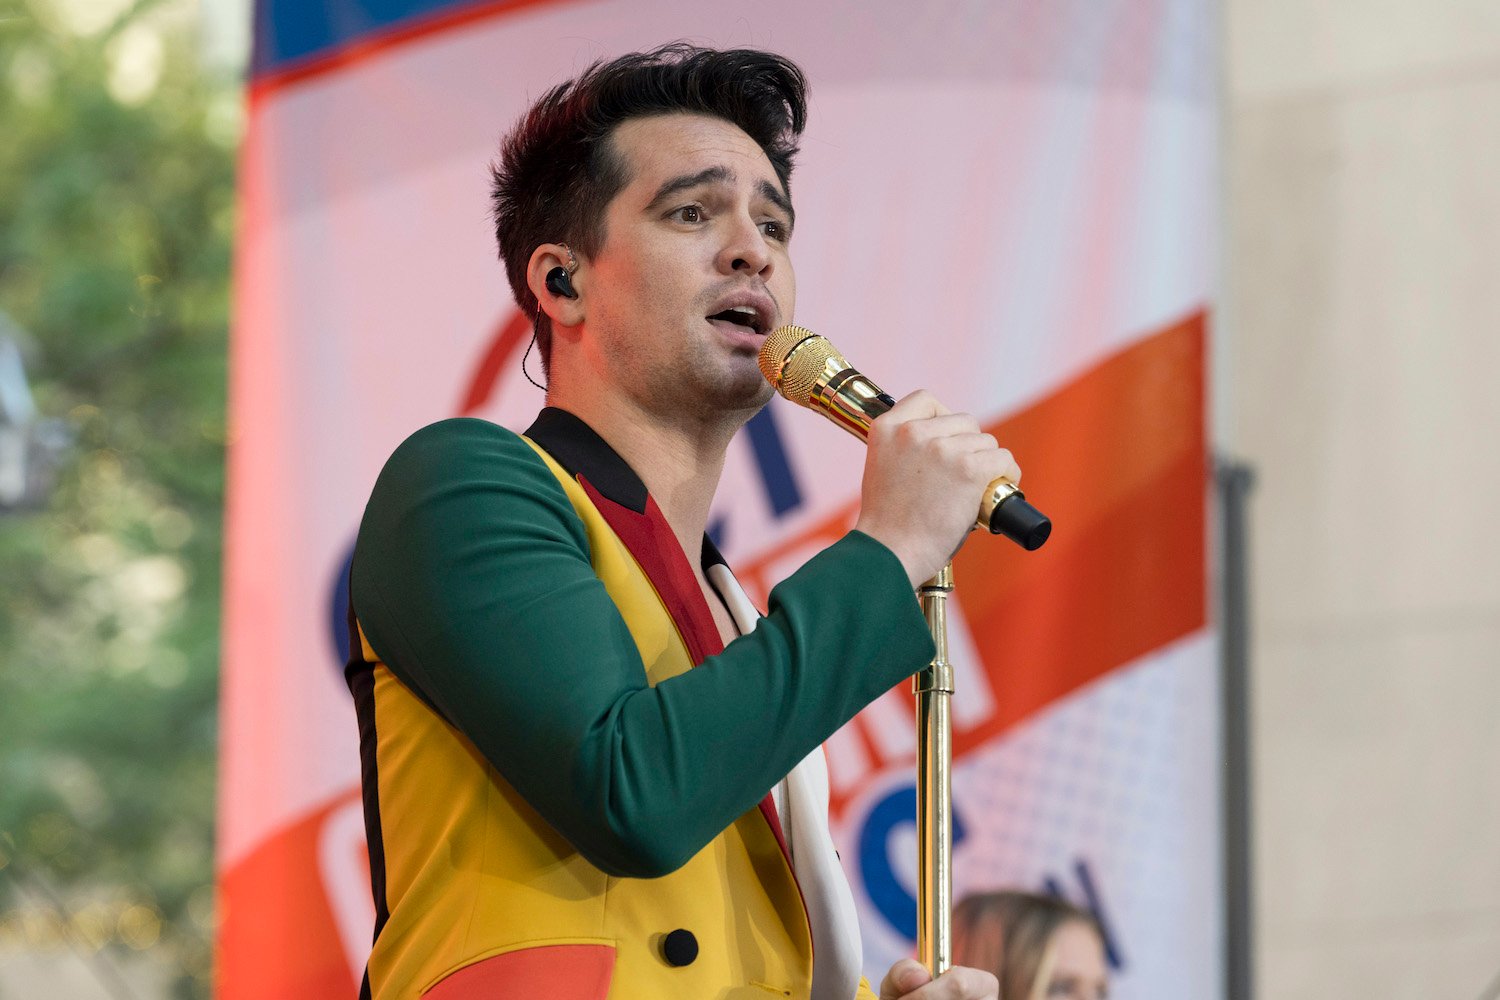 Brendon Urie wears a multi-colored jacket and sings with Panic! At The Disco during a 2022 Today show performance